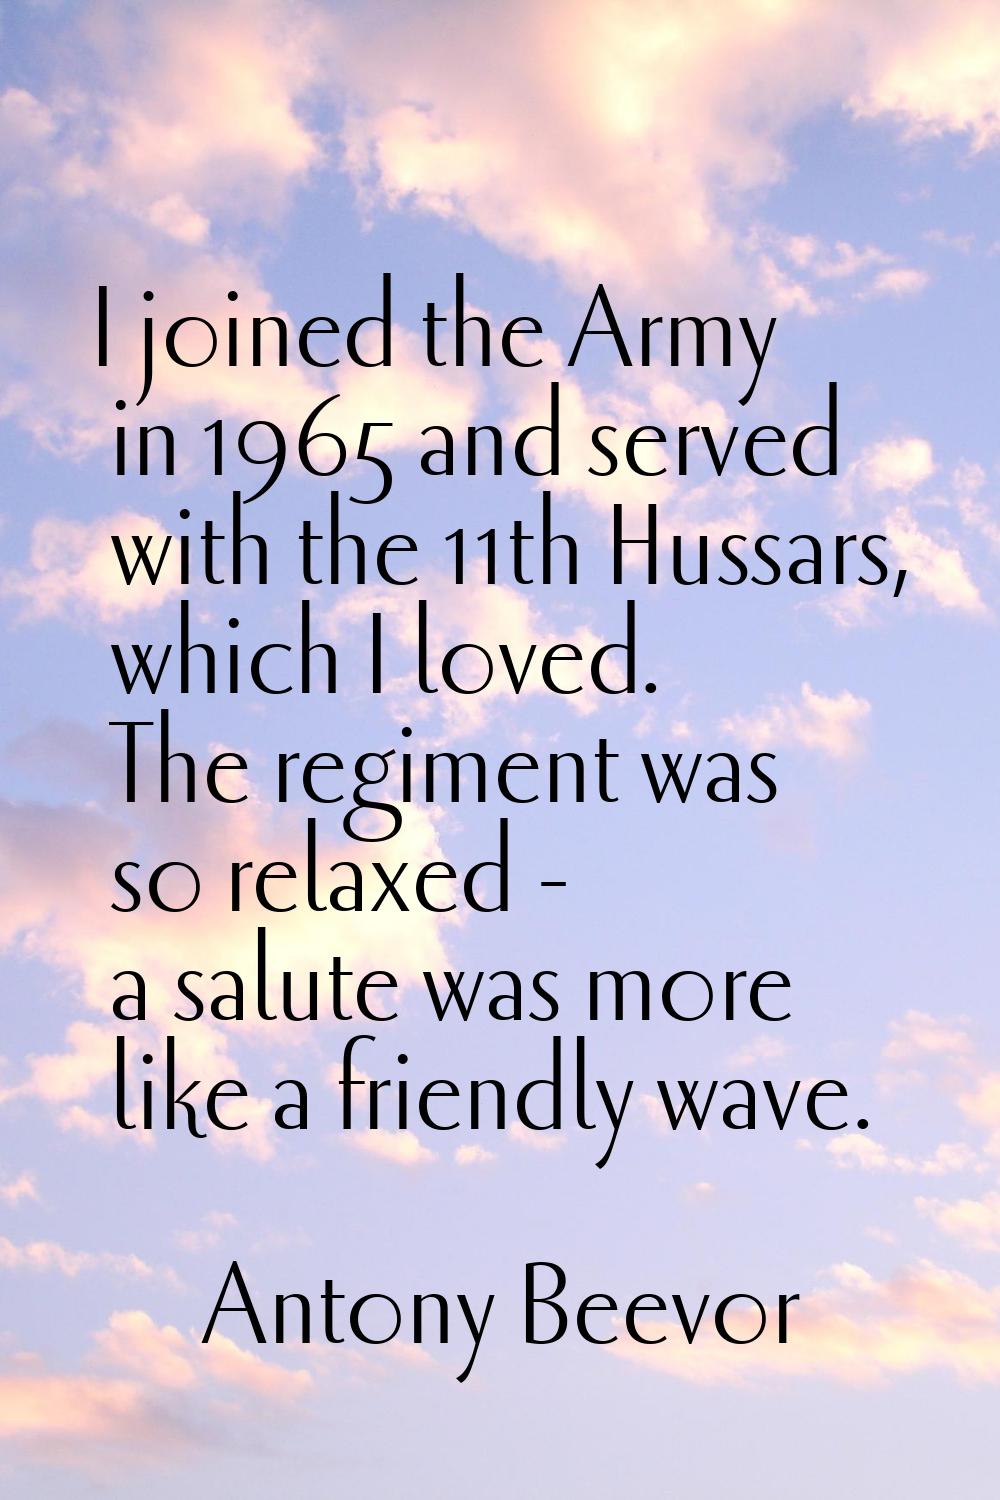 I joined the Army in 1965 and served with the 11th Hussars, which I loved. The regiment was so rela